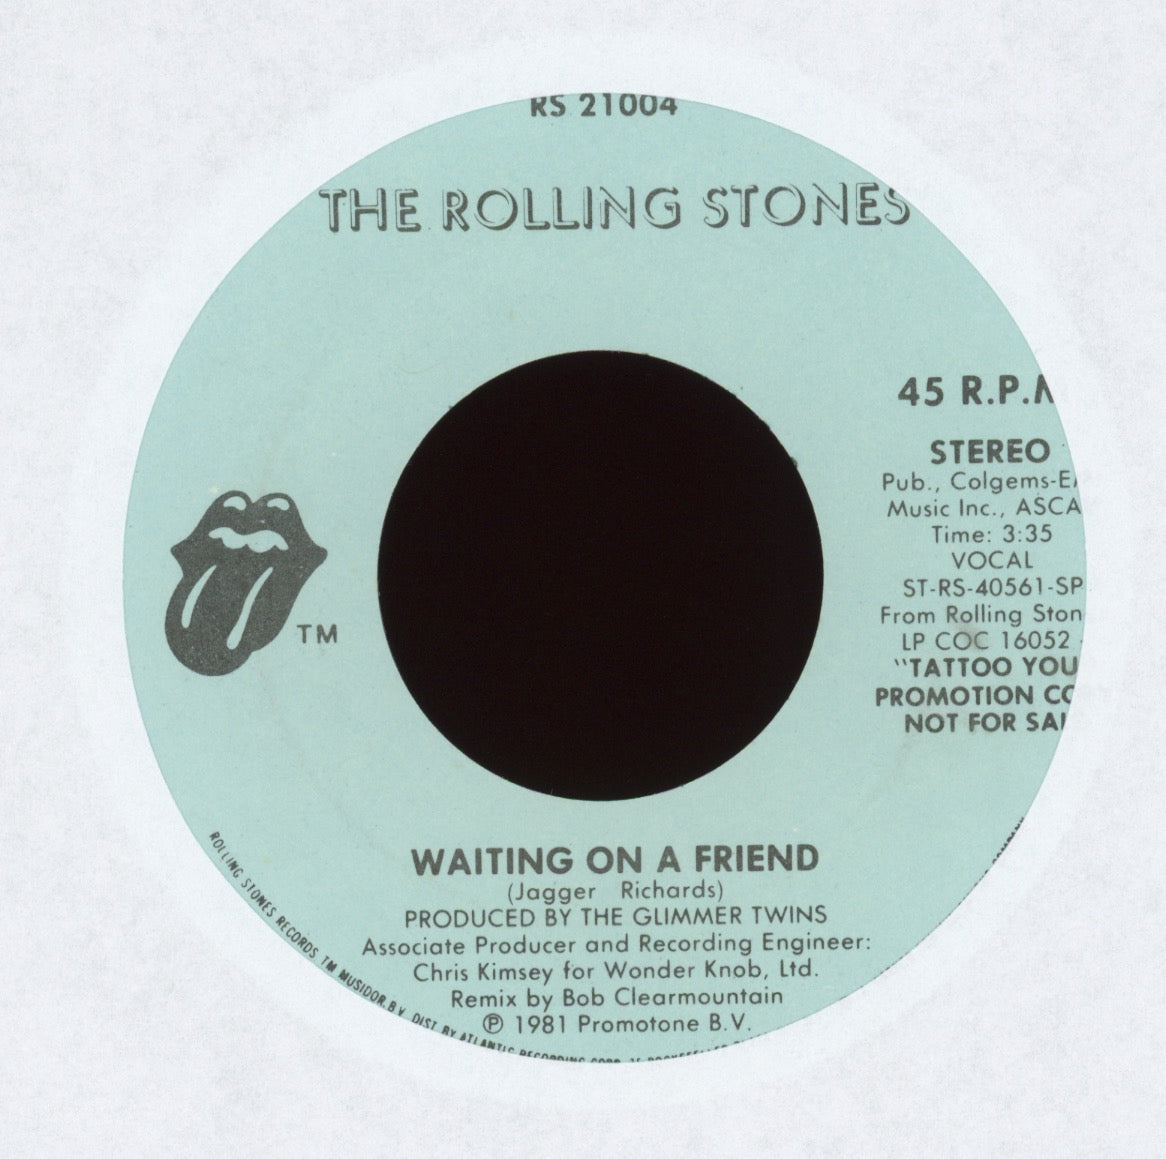 The Rolling Stones - Waiting On A Friend on Rolling Stones Records Promo